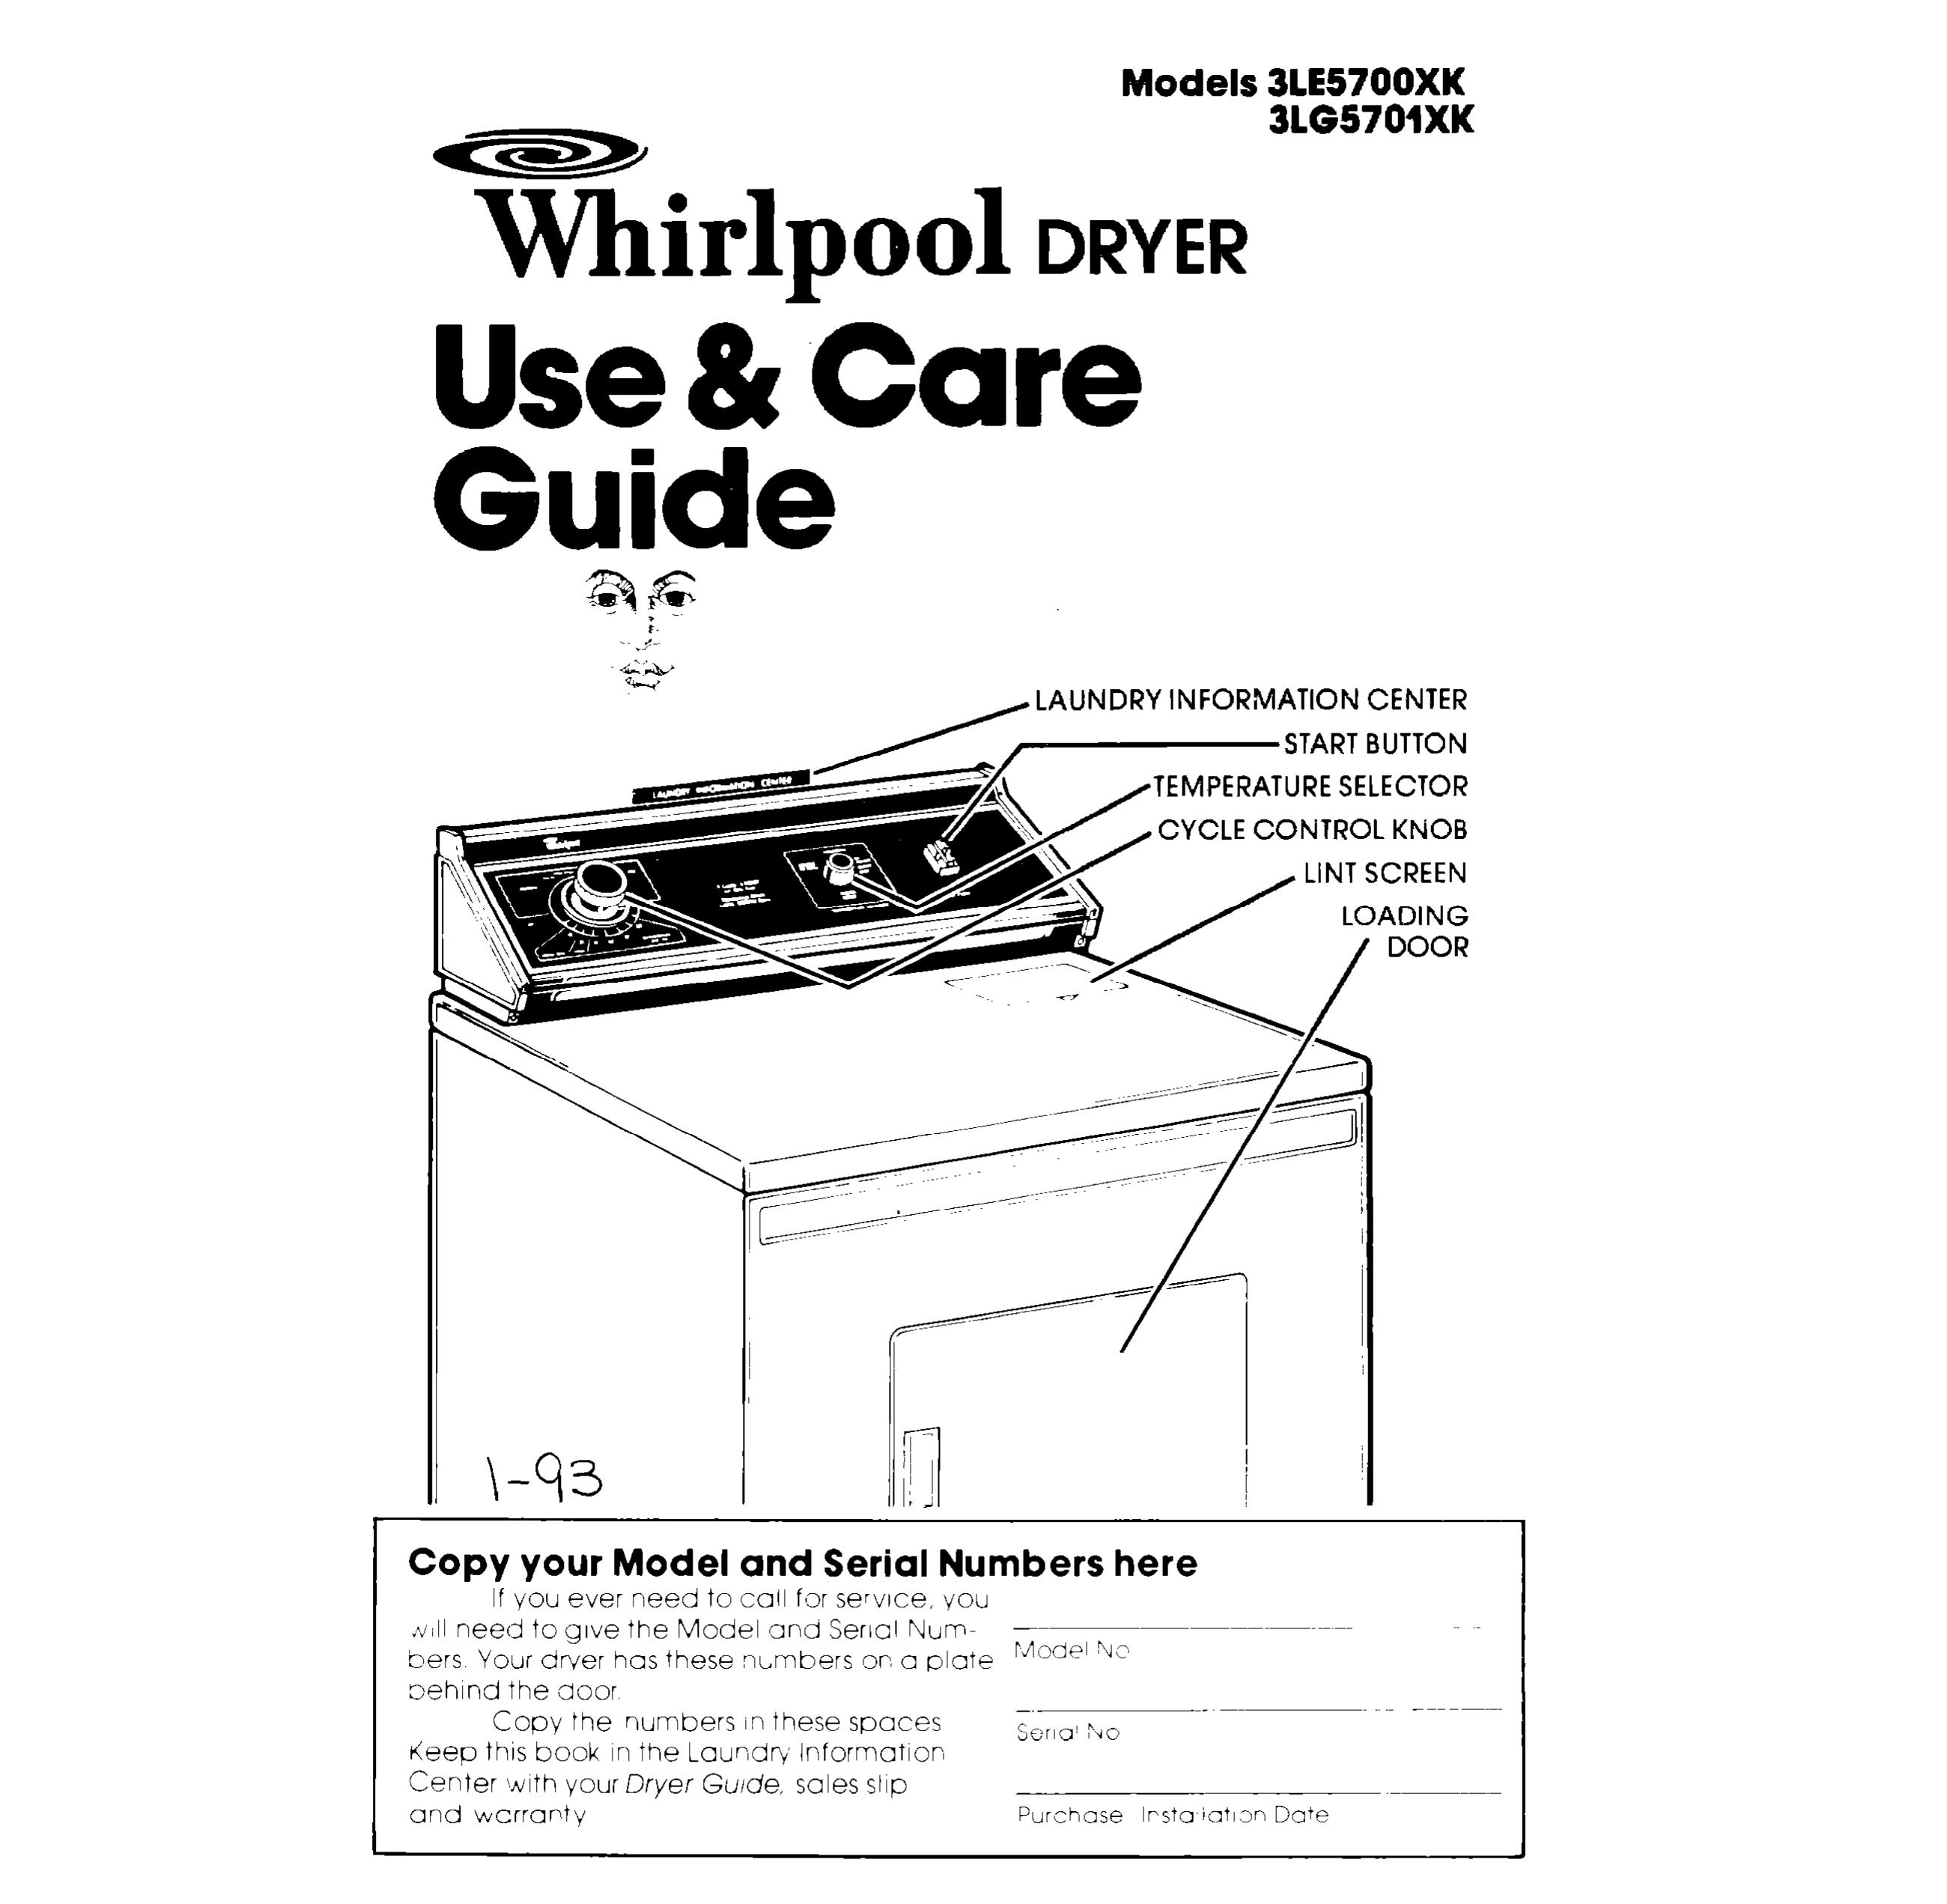 Whirlpool 3LG5701XK Clothes Dryer User Manual